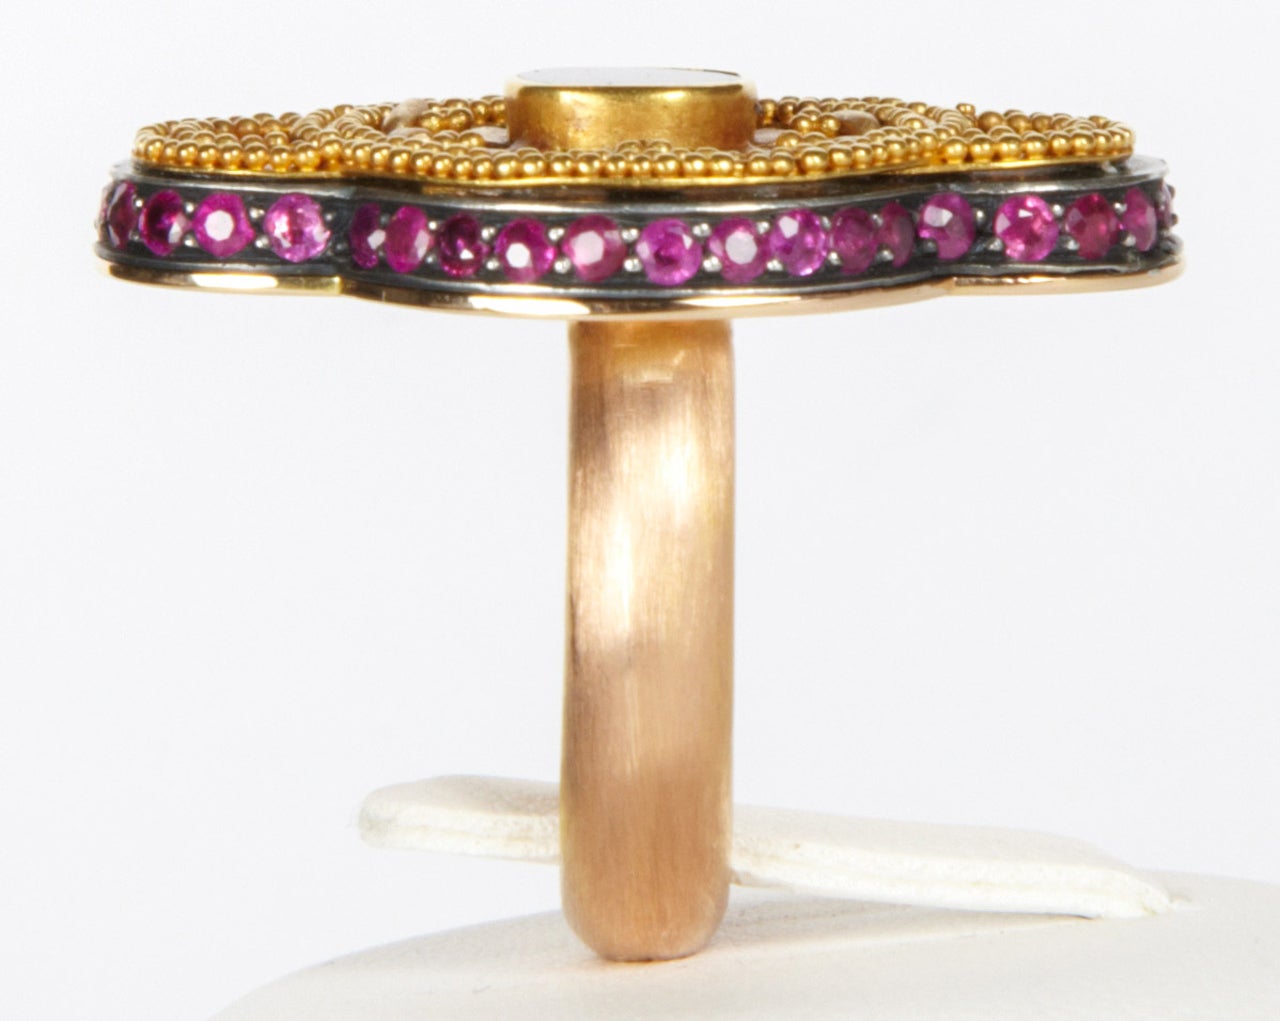 Women's Ring With Roman Gold And Garnet Motive